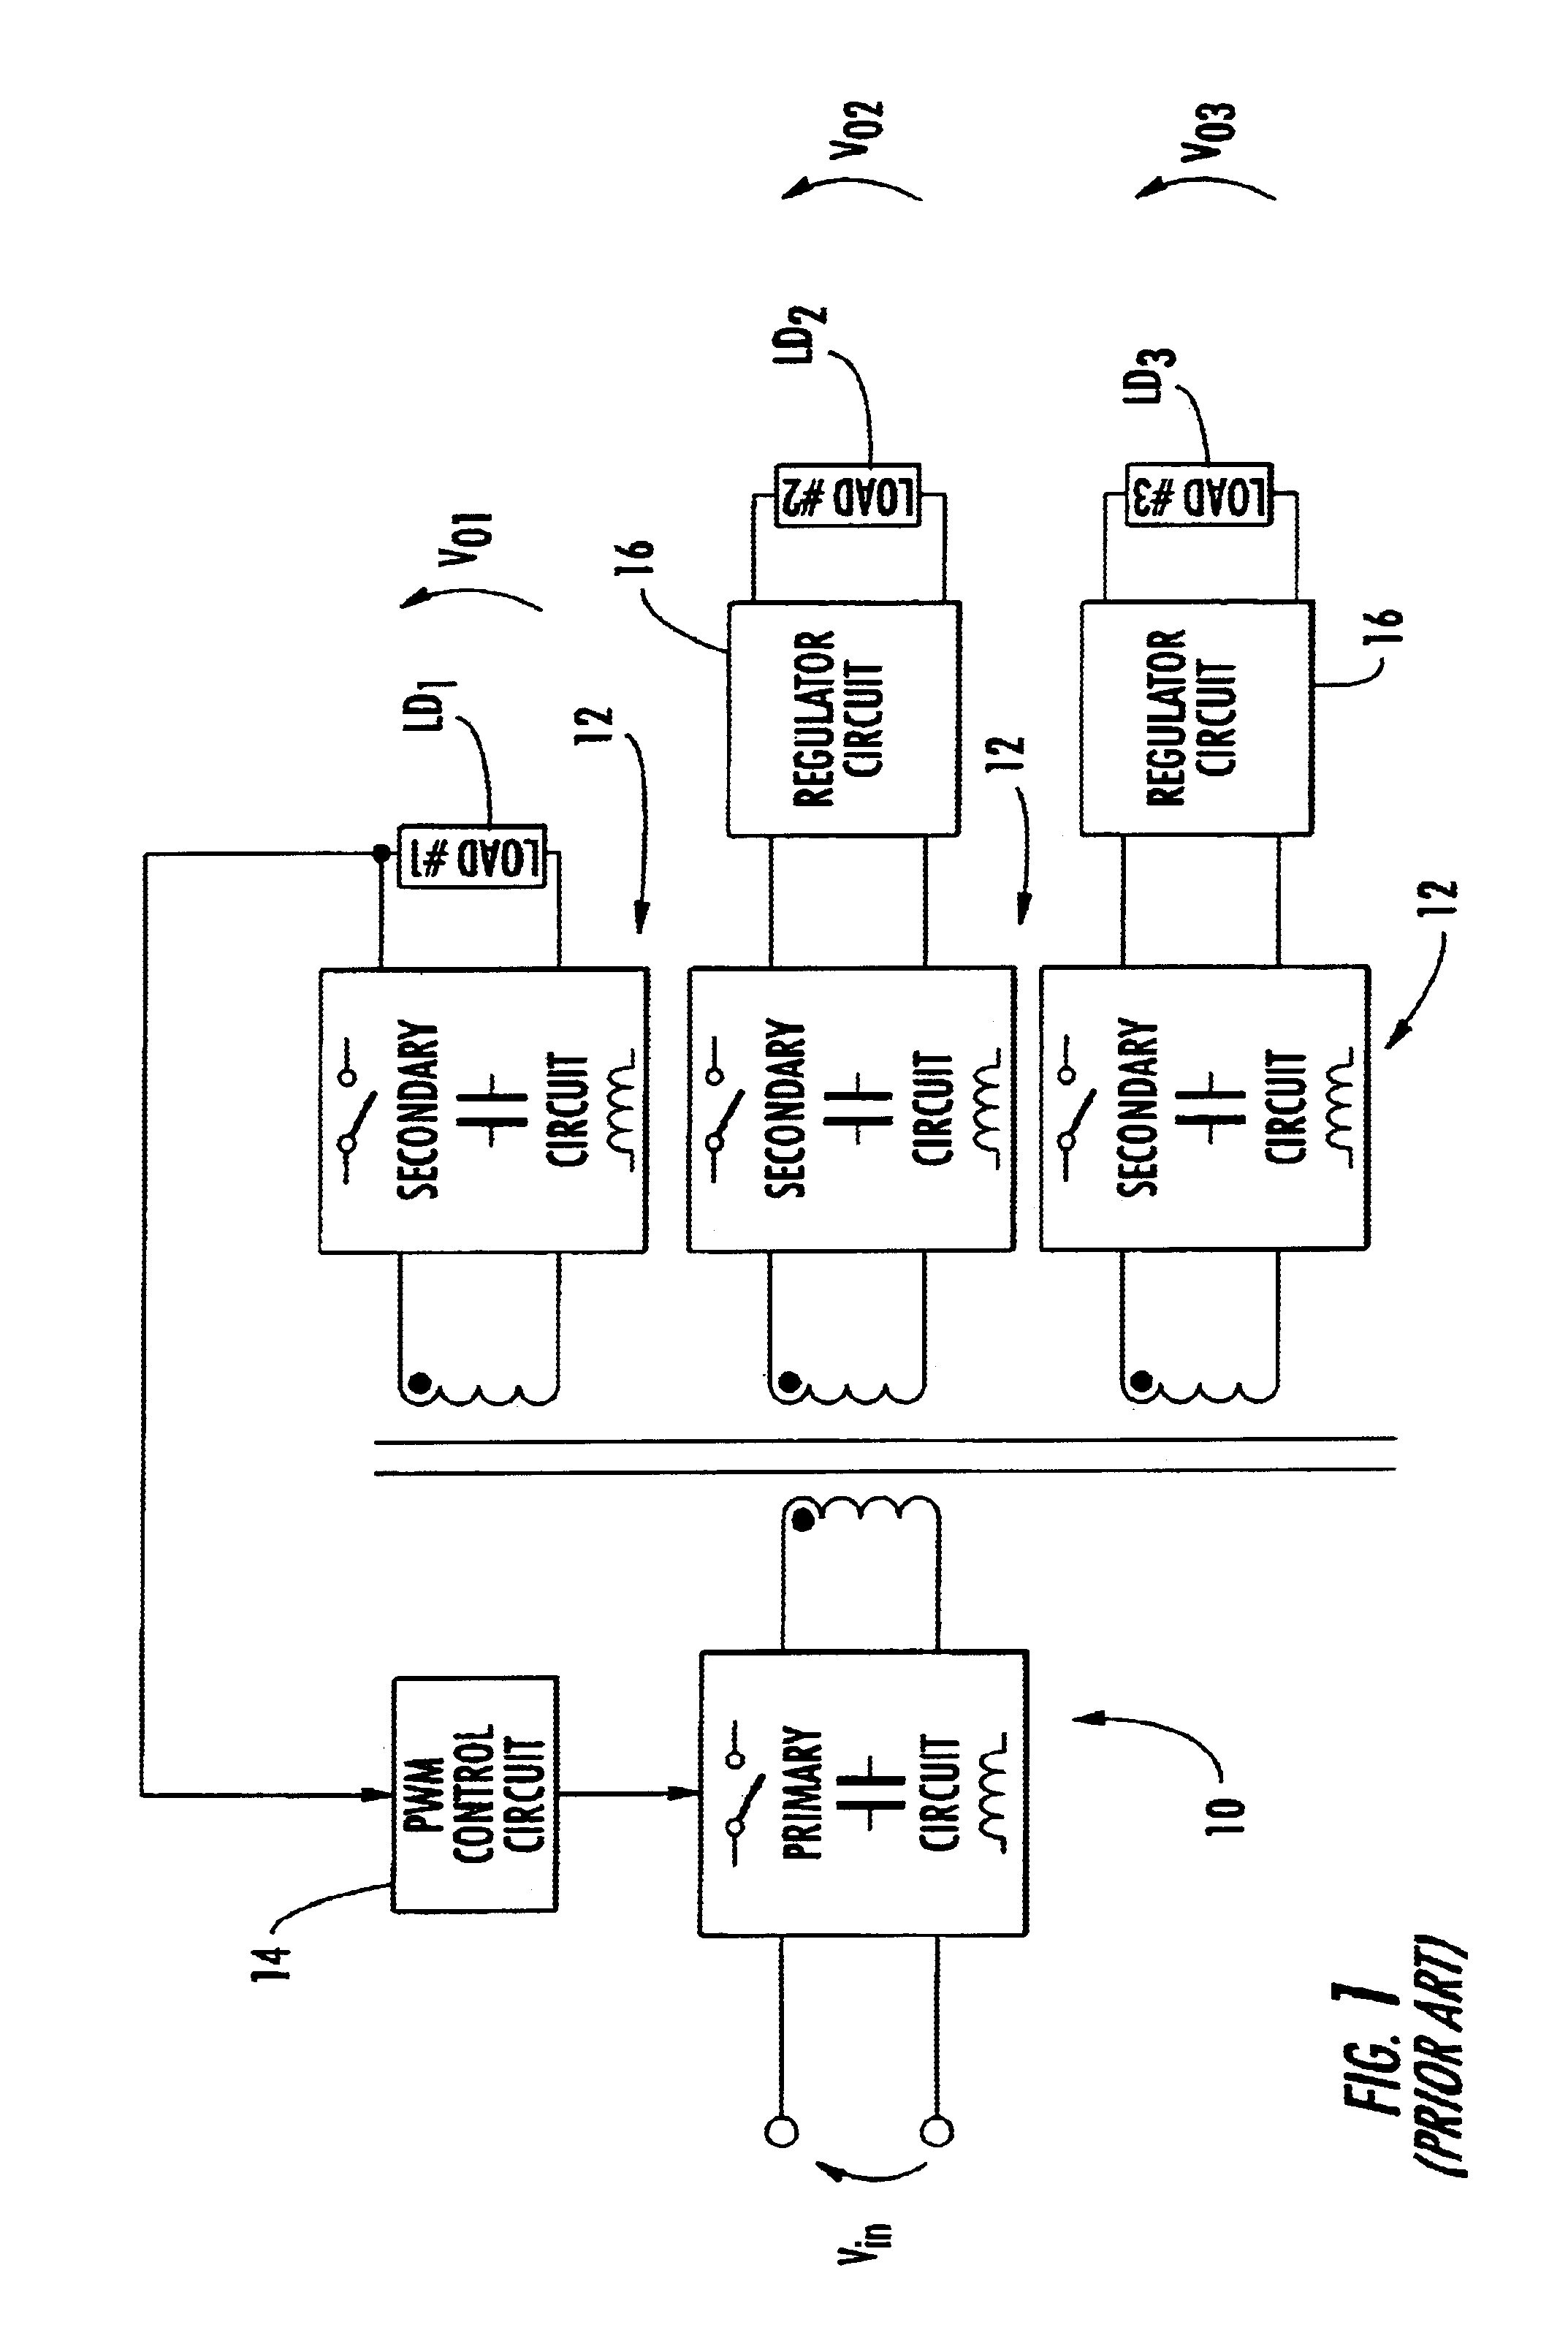 PWM control circuit for the post-adjustment of multi-output switching power supplies